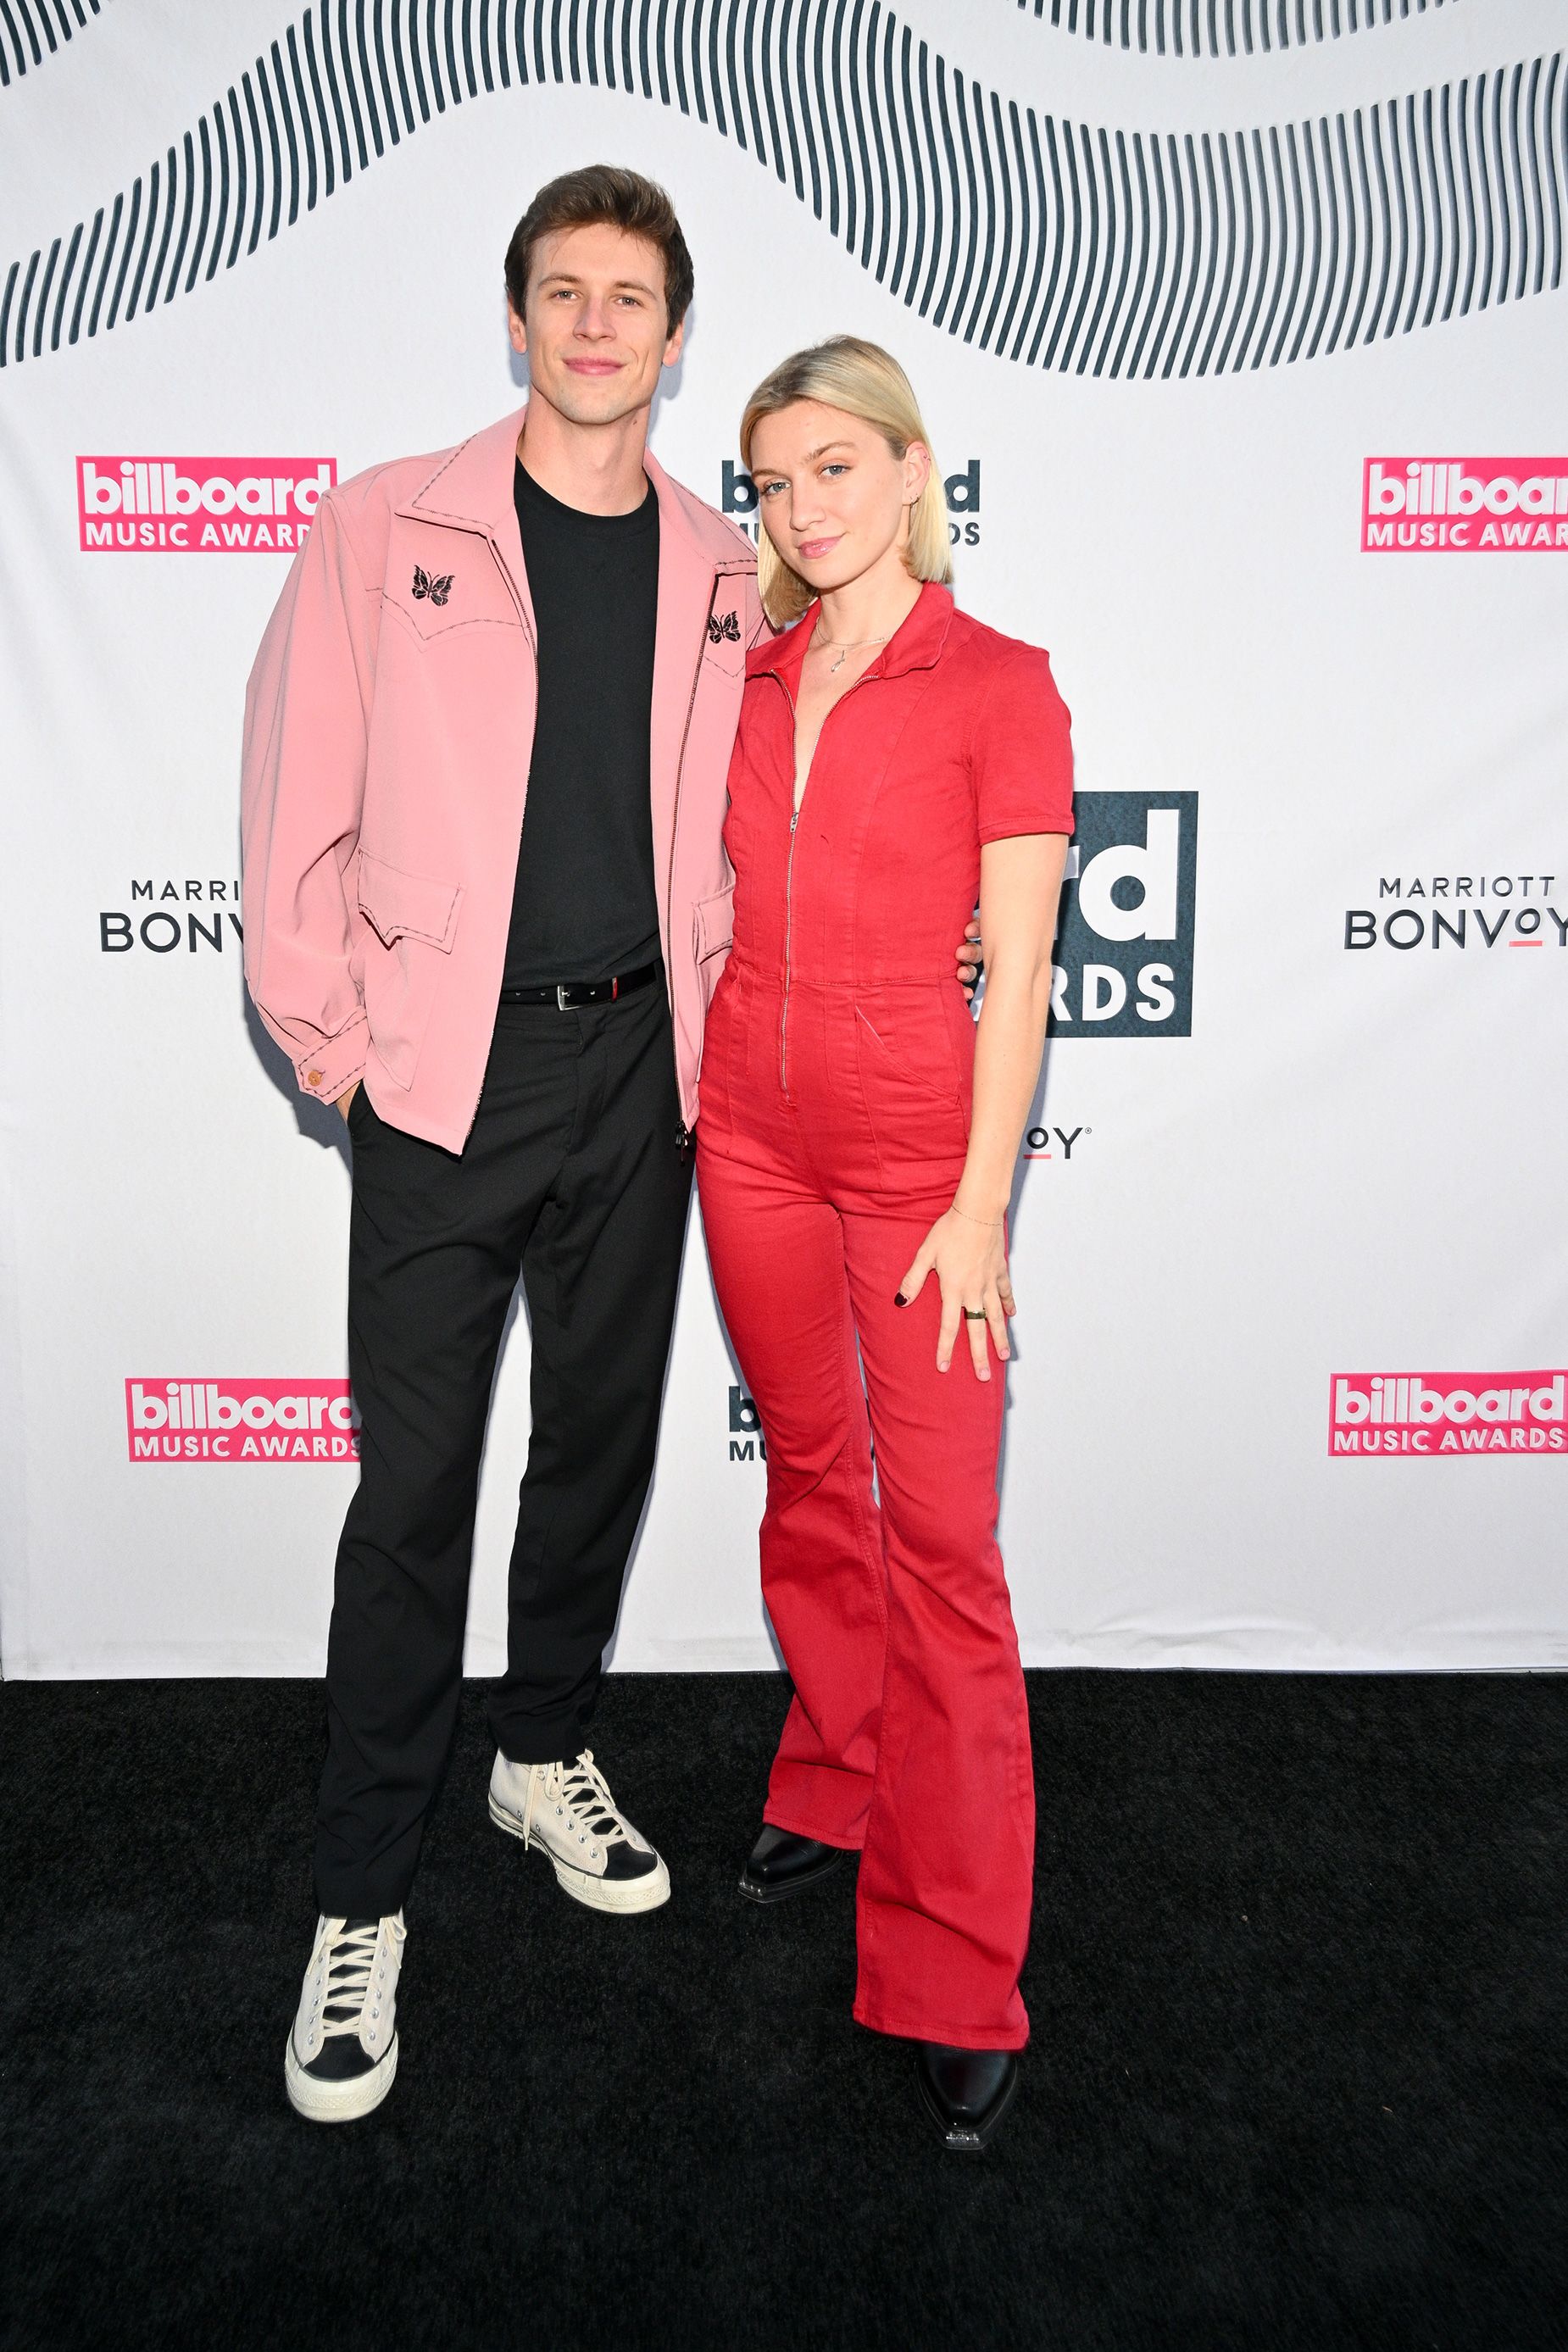 A moment of brightness: Social media stars Anna Sitar and Josh 'Bru' Brubaker brought splashes of color to the otherwise monochromatic affair.